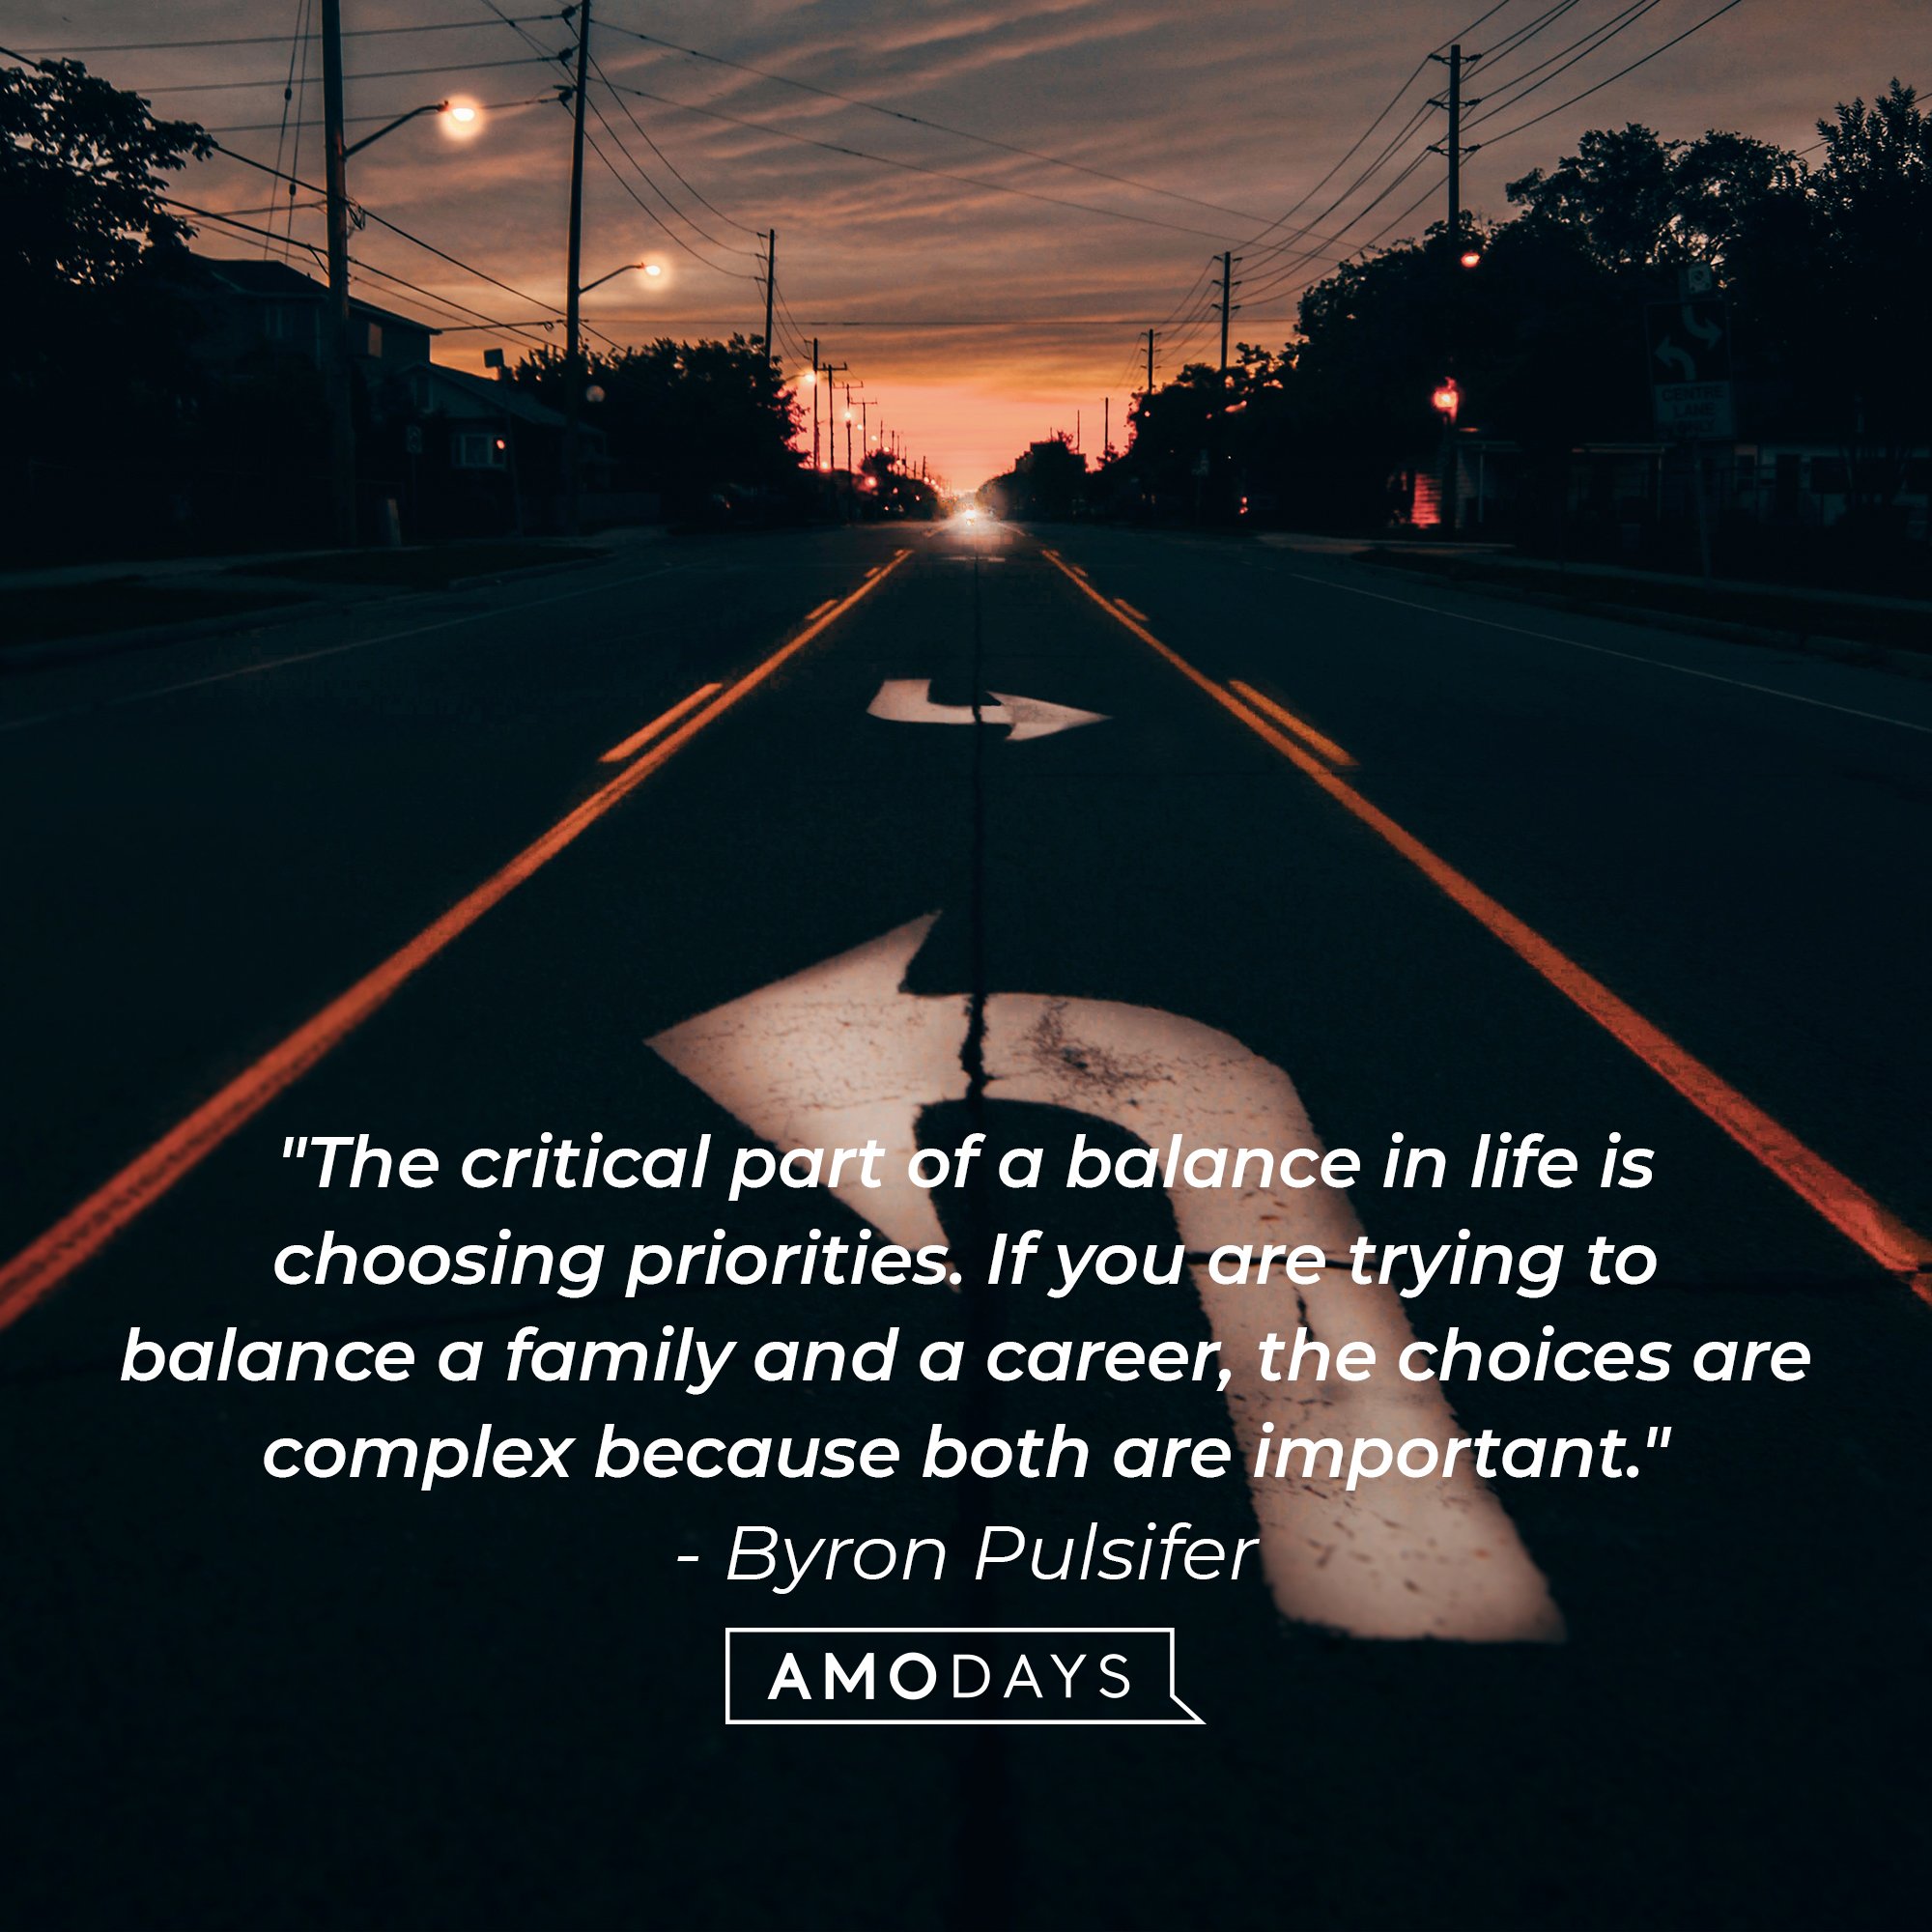  Byron Pulsifer 's quote: "The critical part of a balance in life is choosing priorities. If you are trying to balance a family and a career, the choices are complex because both are important." | Image: AmoDays